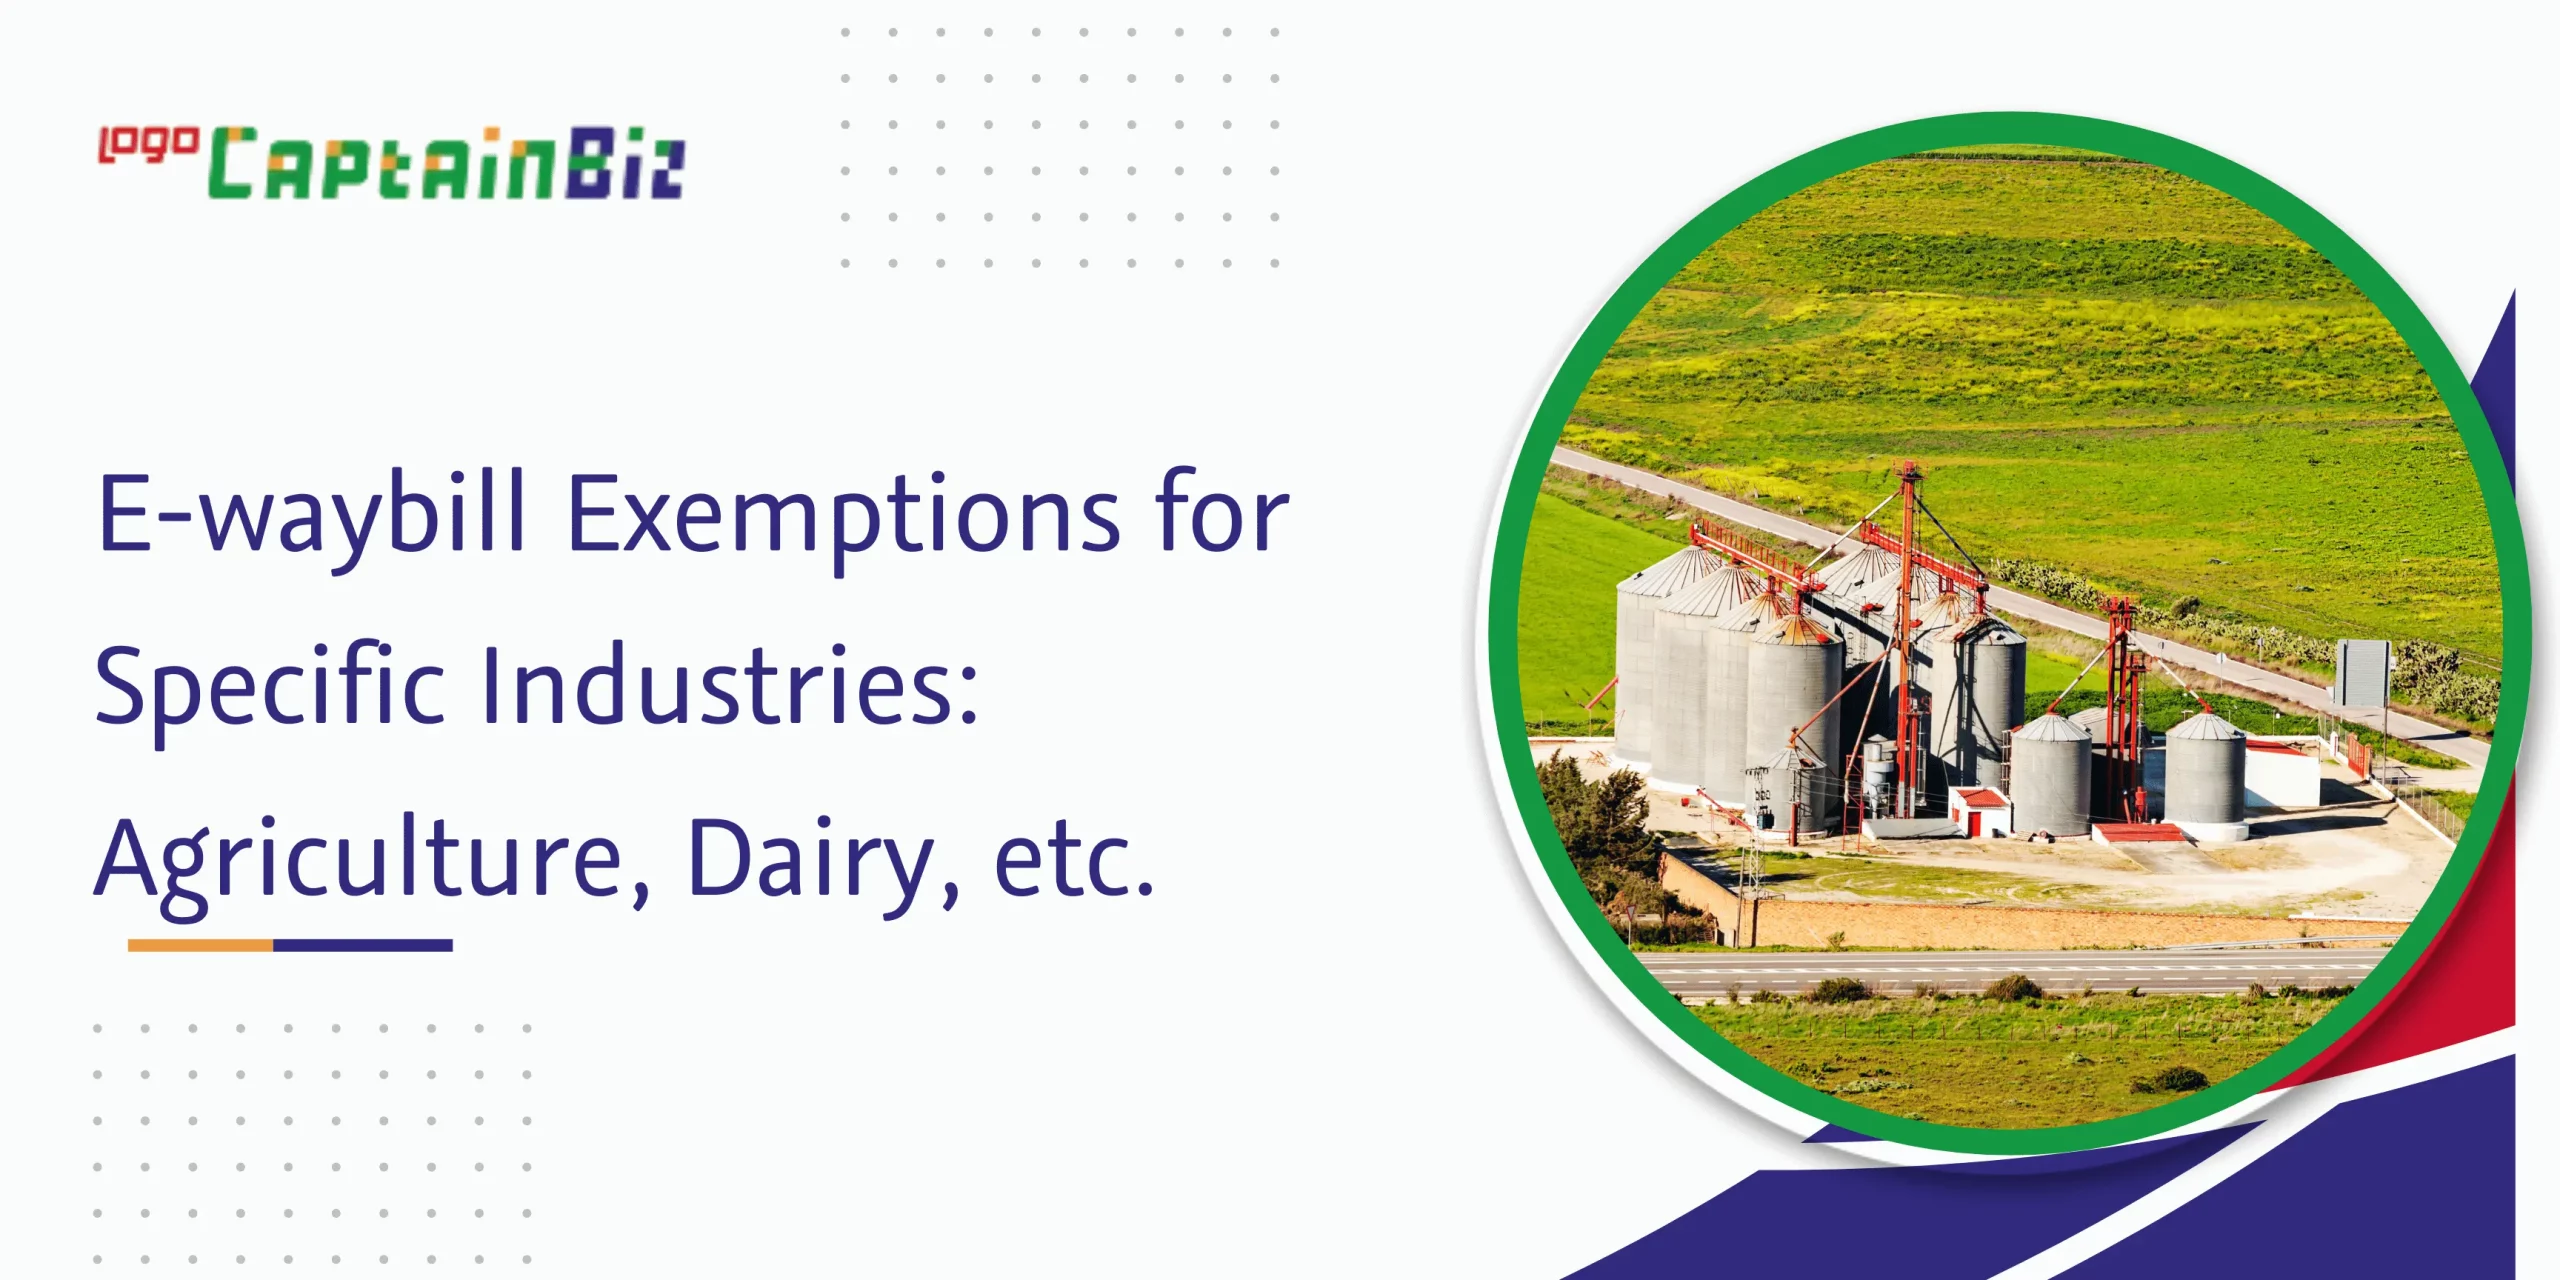 CaptainBiz: e-waybill exemptions for specific industries: agriculture, dairy, etc.